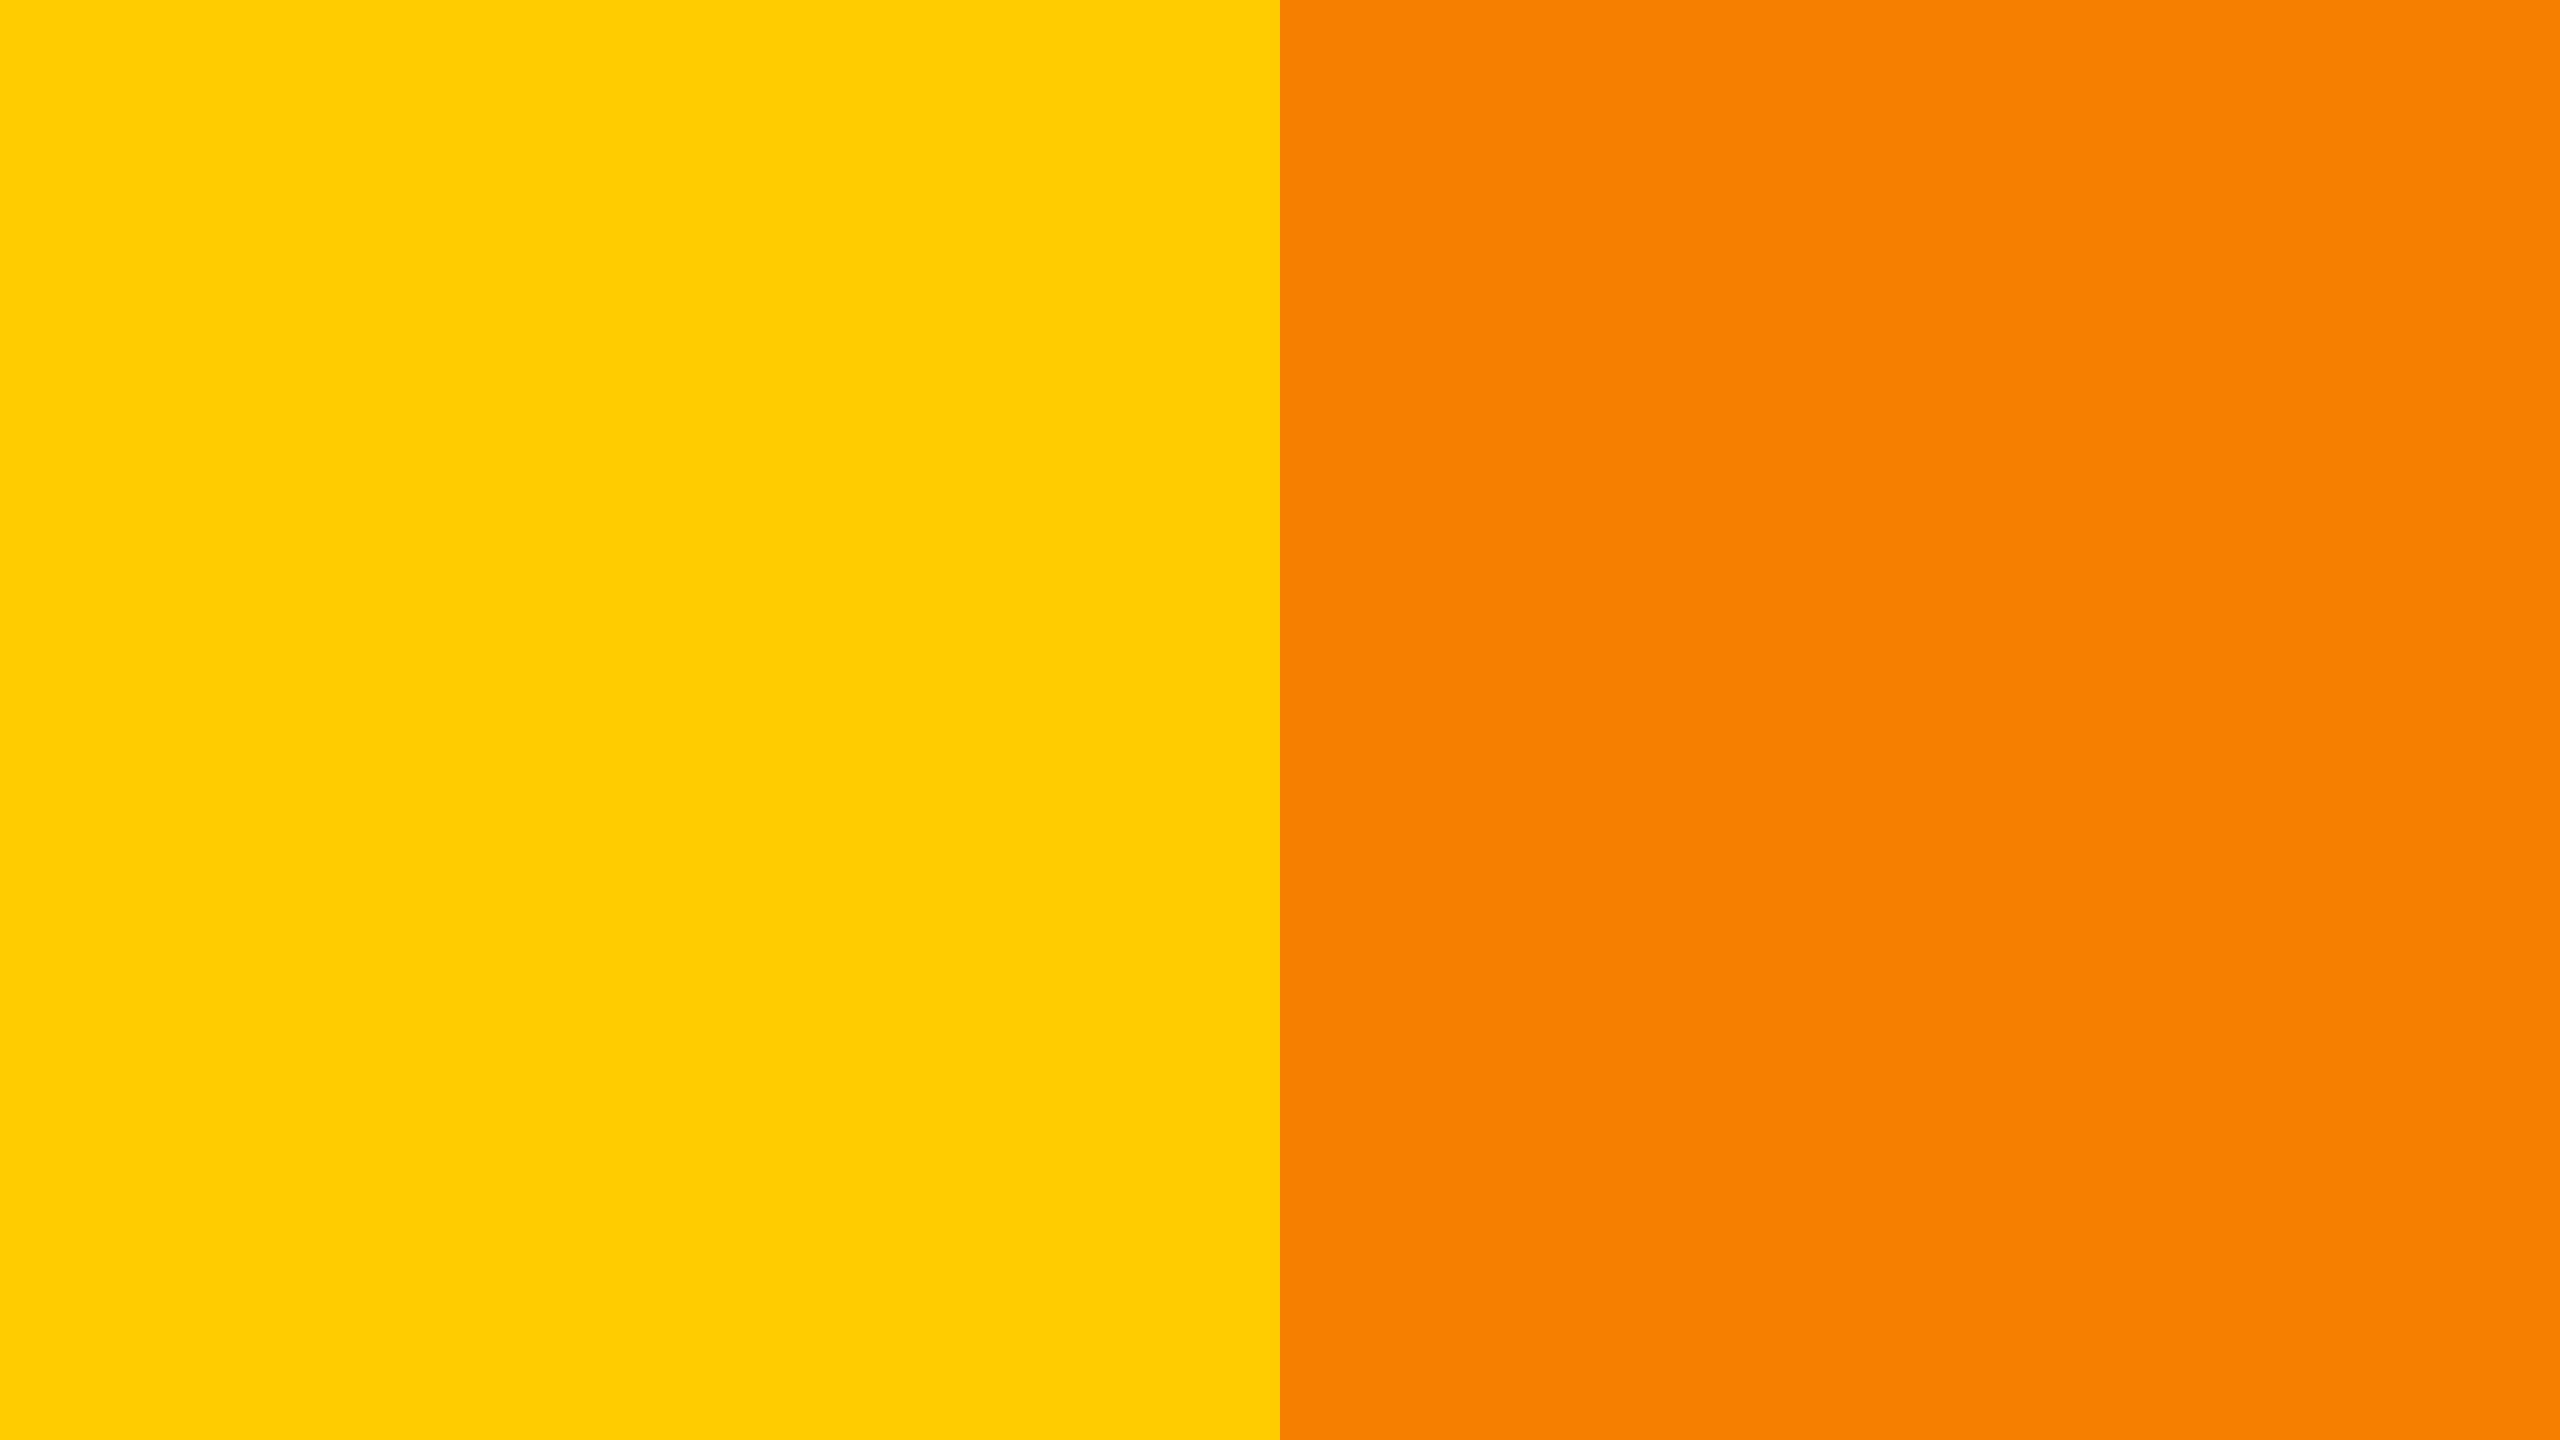 Usc Gold And University Of Tennessee Orange Solid Two Color Background